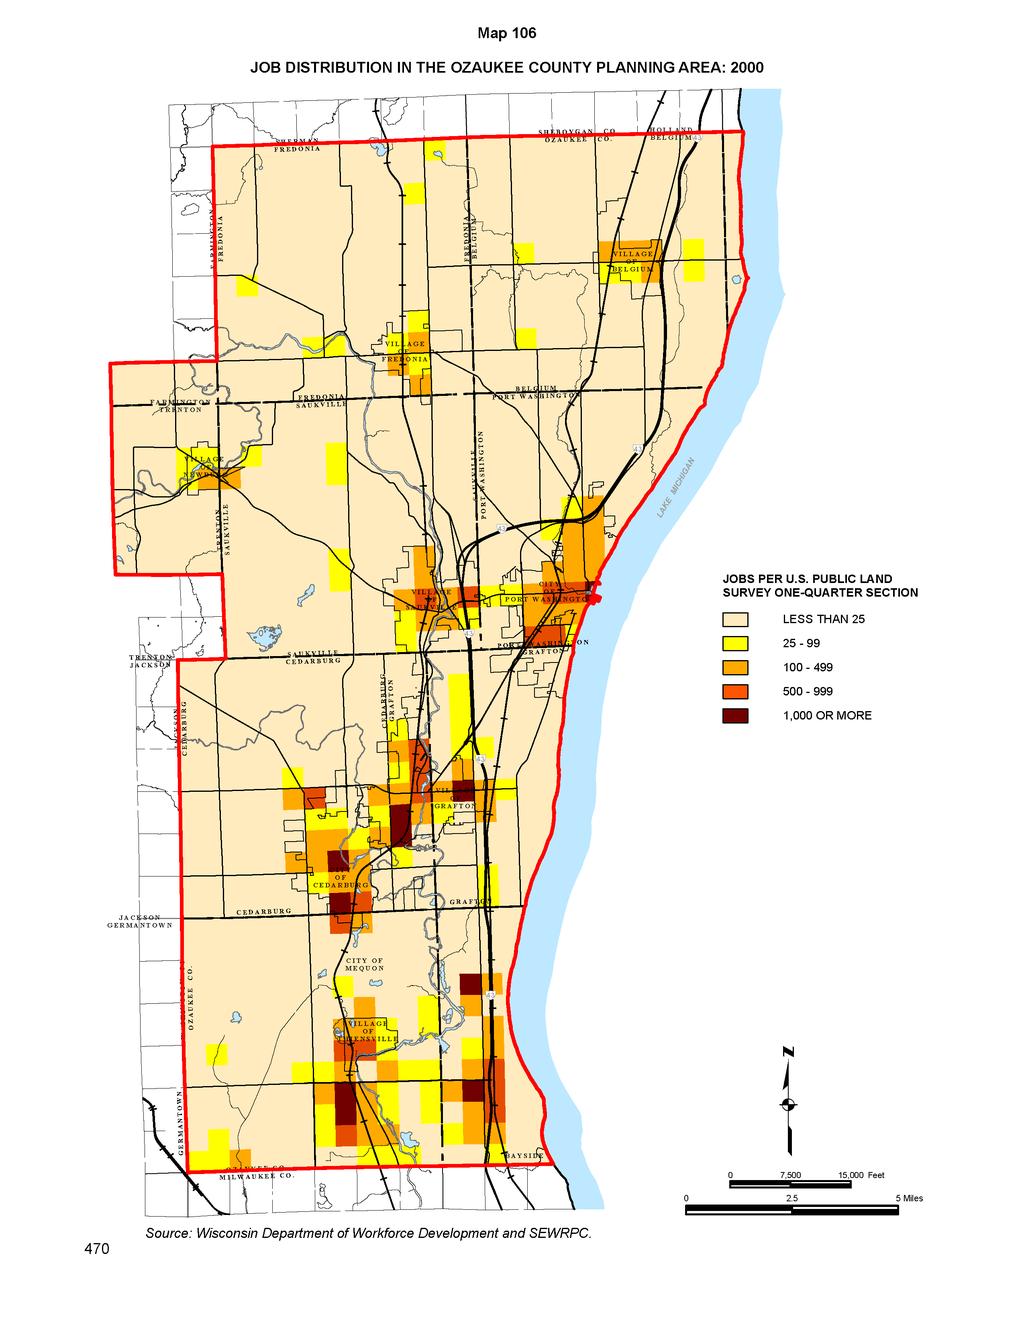 Map 106 JOB DISTRIBUTION IN THE OZAUKEE COUNTY PLANNING AREA: 2000 JOBS PER U.S. PUBLIC LAND SURVEY ONE-QUARTER SECTION o LESS THAN 25 25-99 100-499 500-999 1,000 OR MORE GOW N 6 u 7,500 15,000 Feet 2.